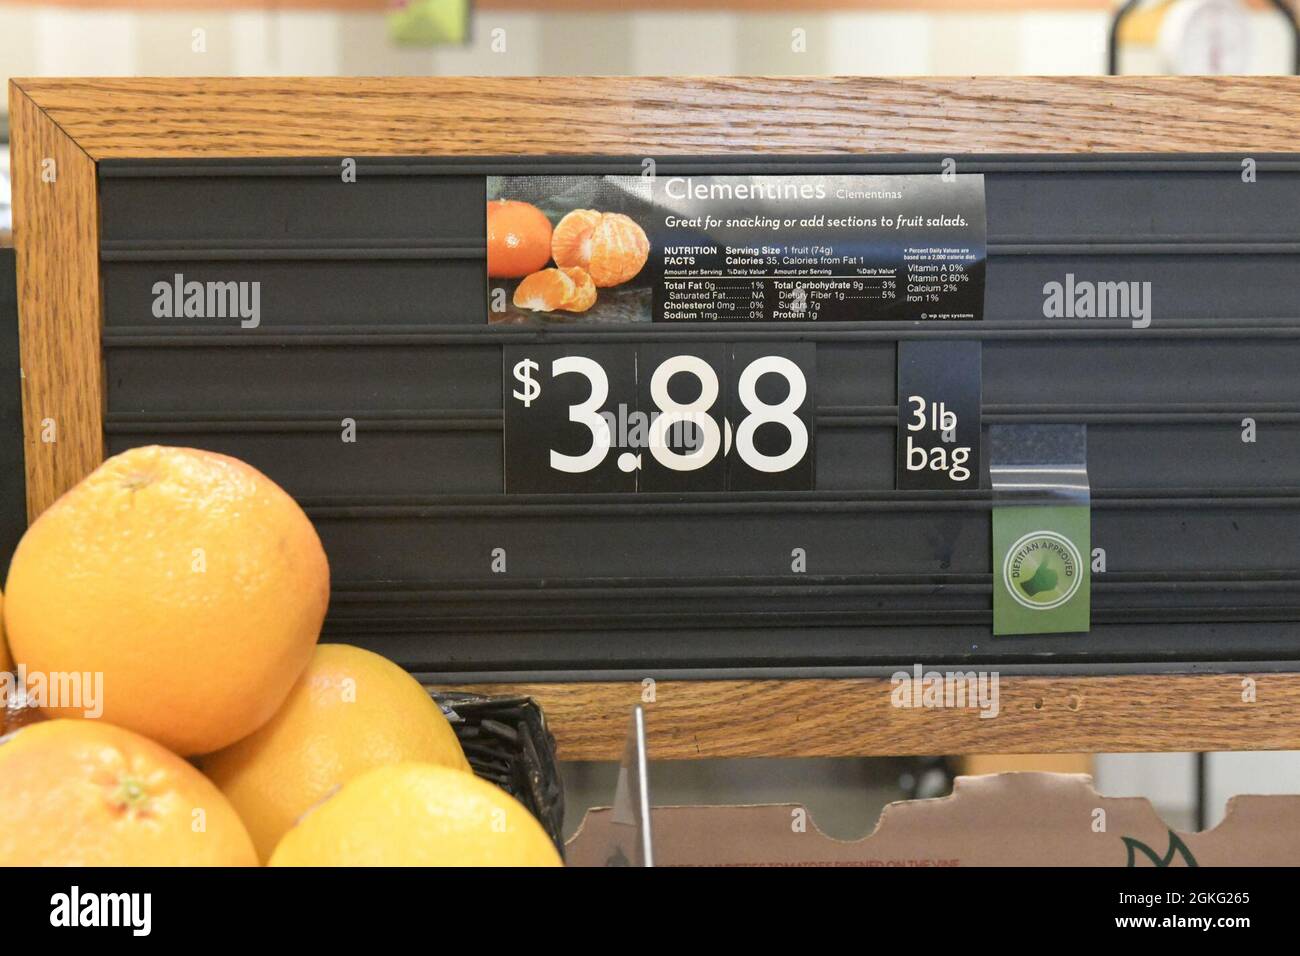 A Green Thumb nutrition identification card is placed above a bin of Clementine’s in the installation commissary at Robin Air Force Base, Georgia, April 13, 2021. The dietitian-approved thumb initiative aims to make locating healthy, nutritionally-dense foods easy for shoppers to find so that they can make healthier food choices. Stock Photo